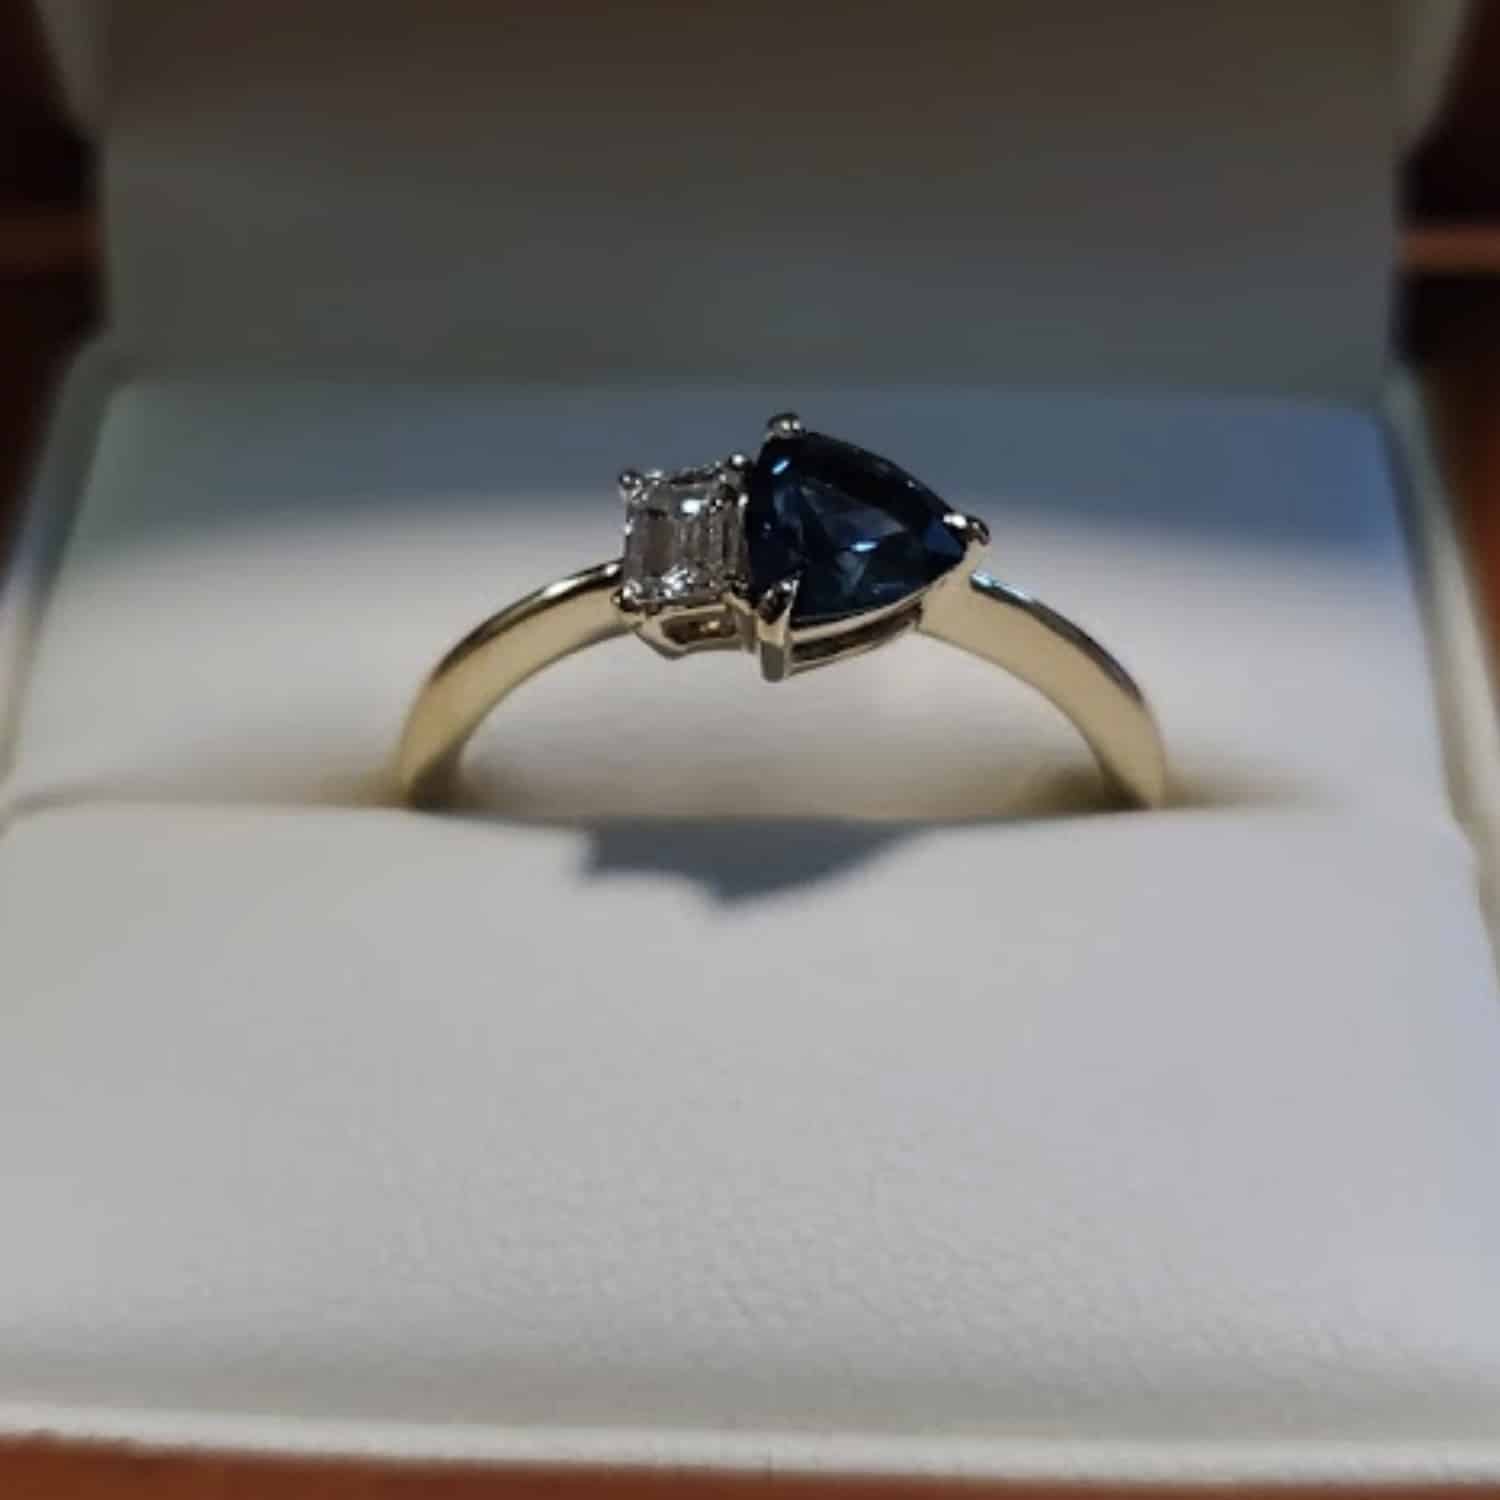 A photo from a customer review showing a Toi et Moi ring in a ring box